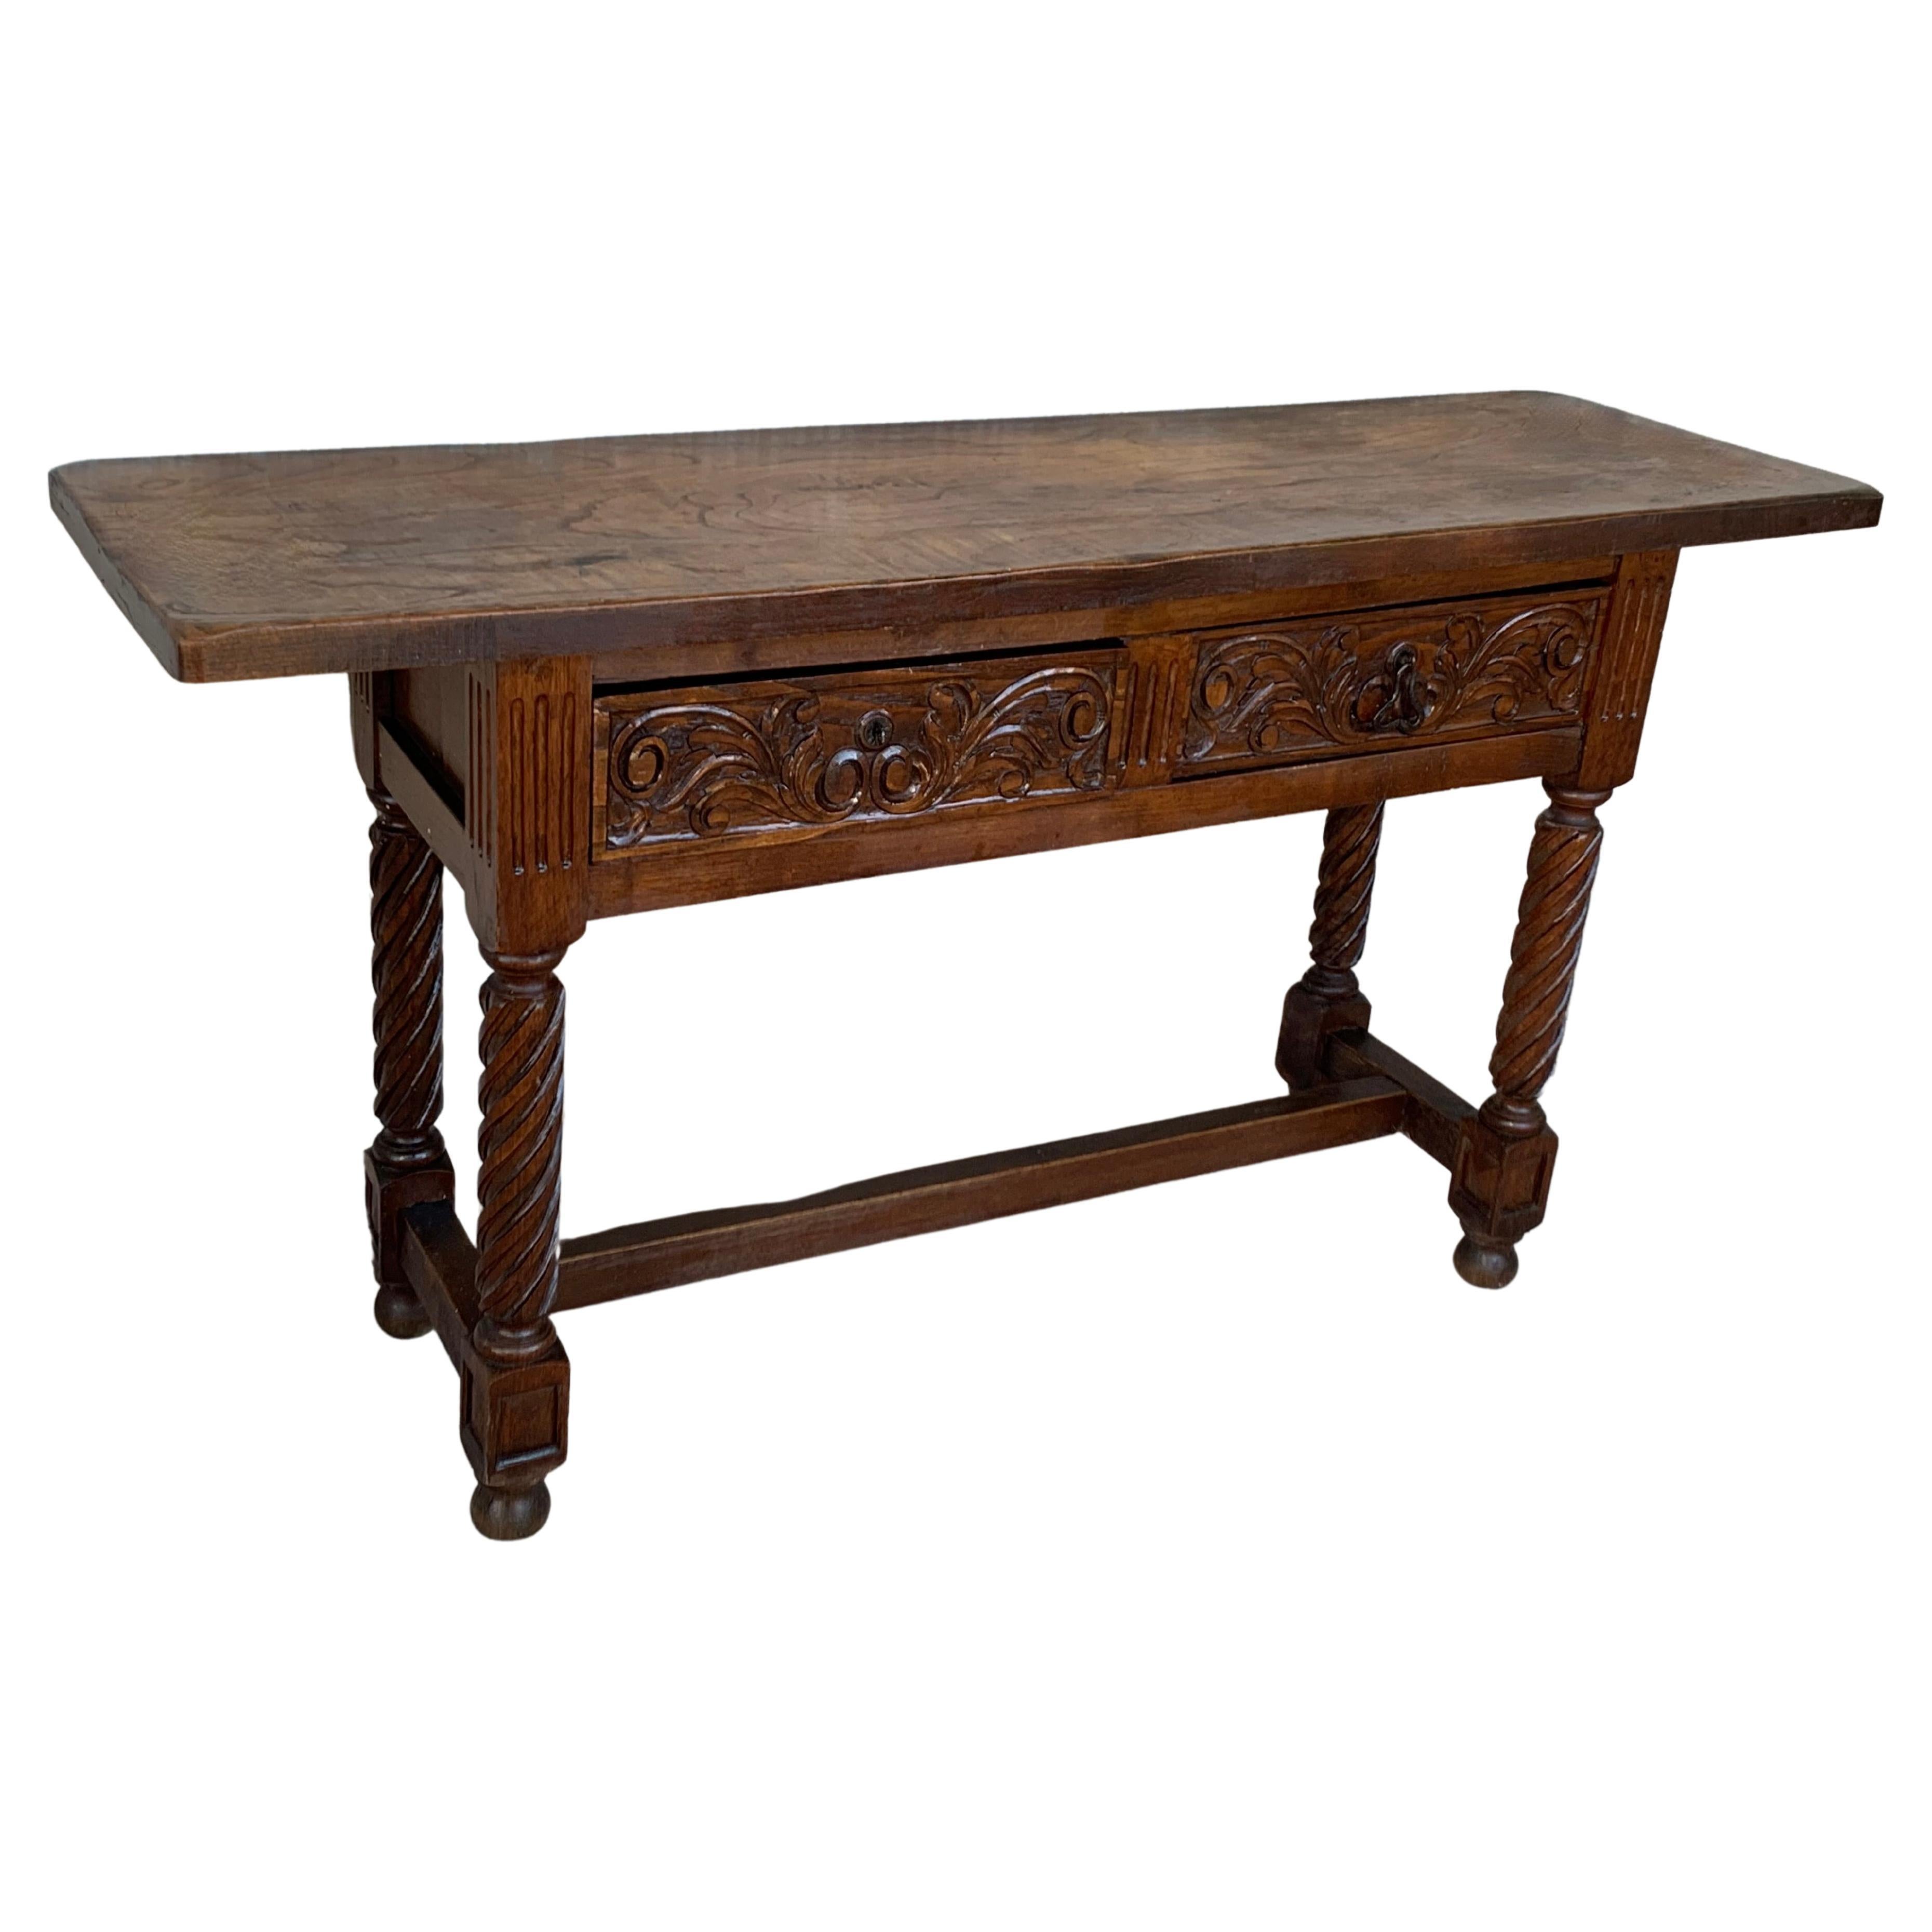 A 19th century walnut console table with a slab top above a frieze with two drawers with front decorated with carved floral motifs and incised with additional decoration and a single original iron pull in each drawer. The table is supported on a